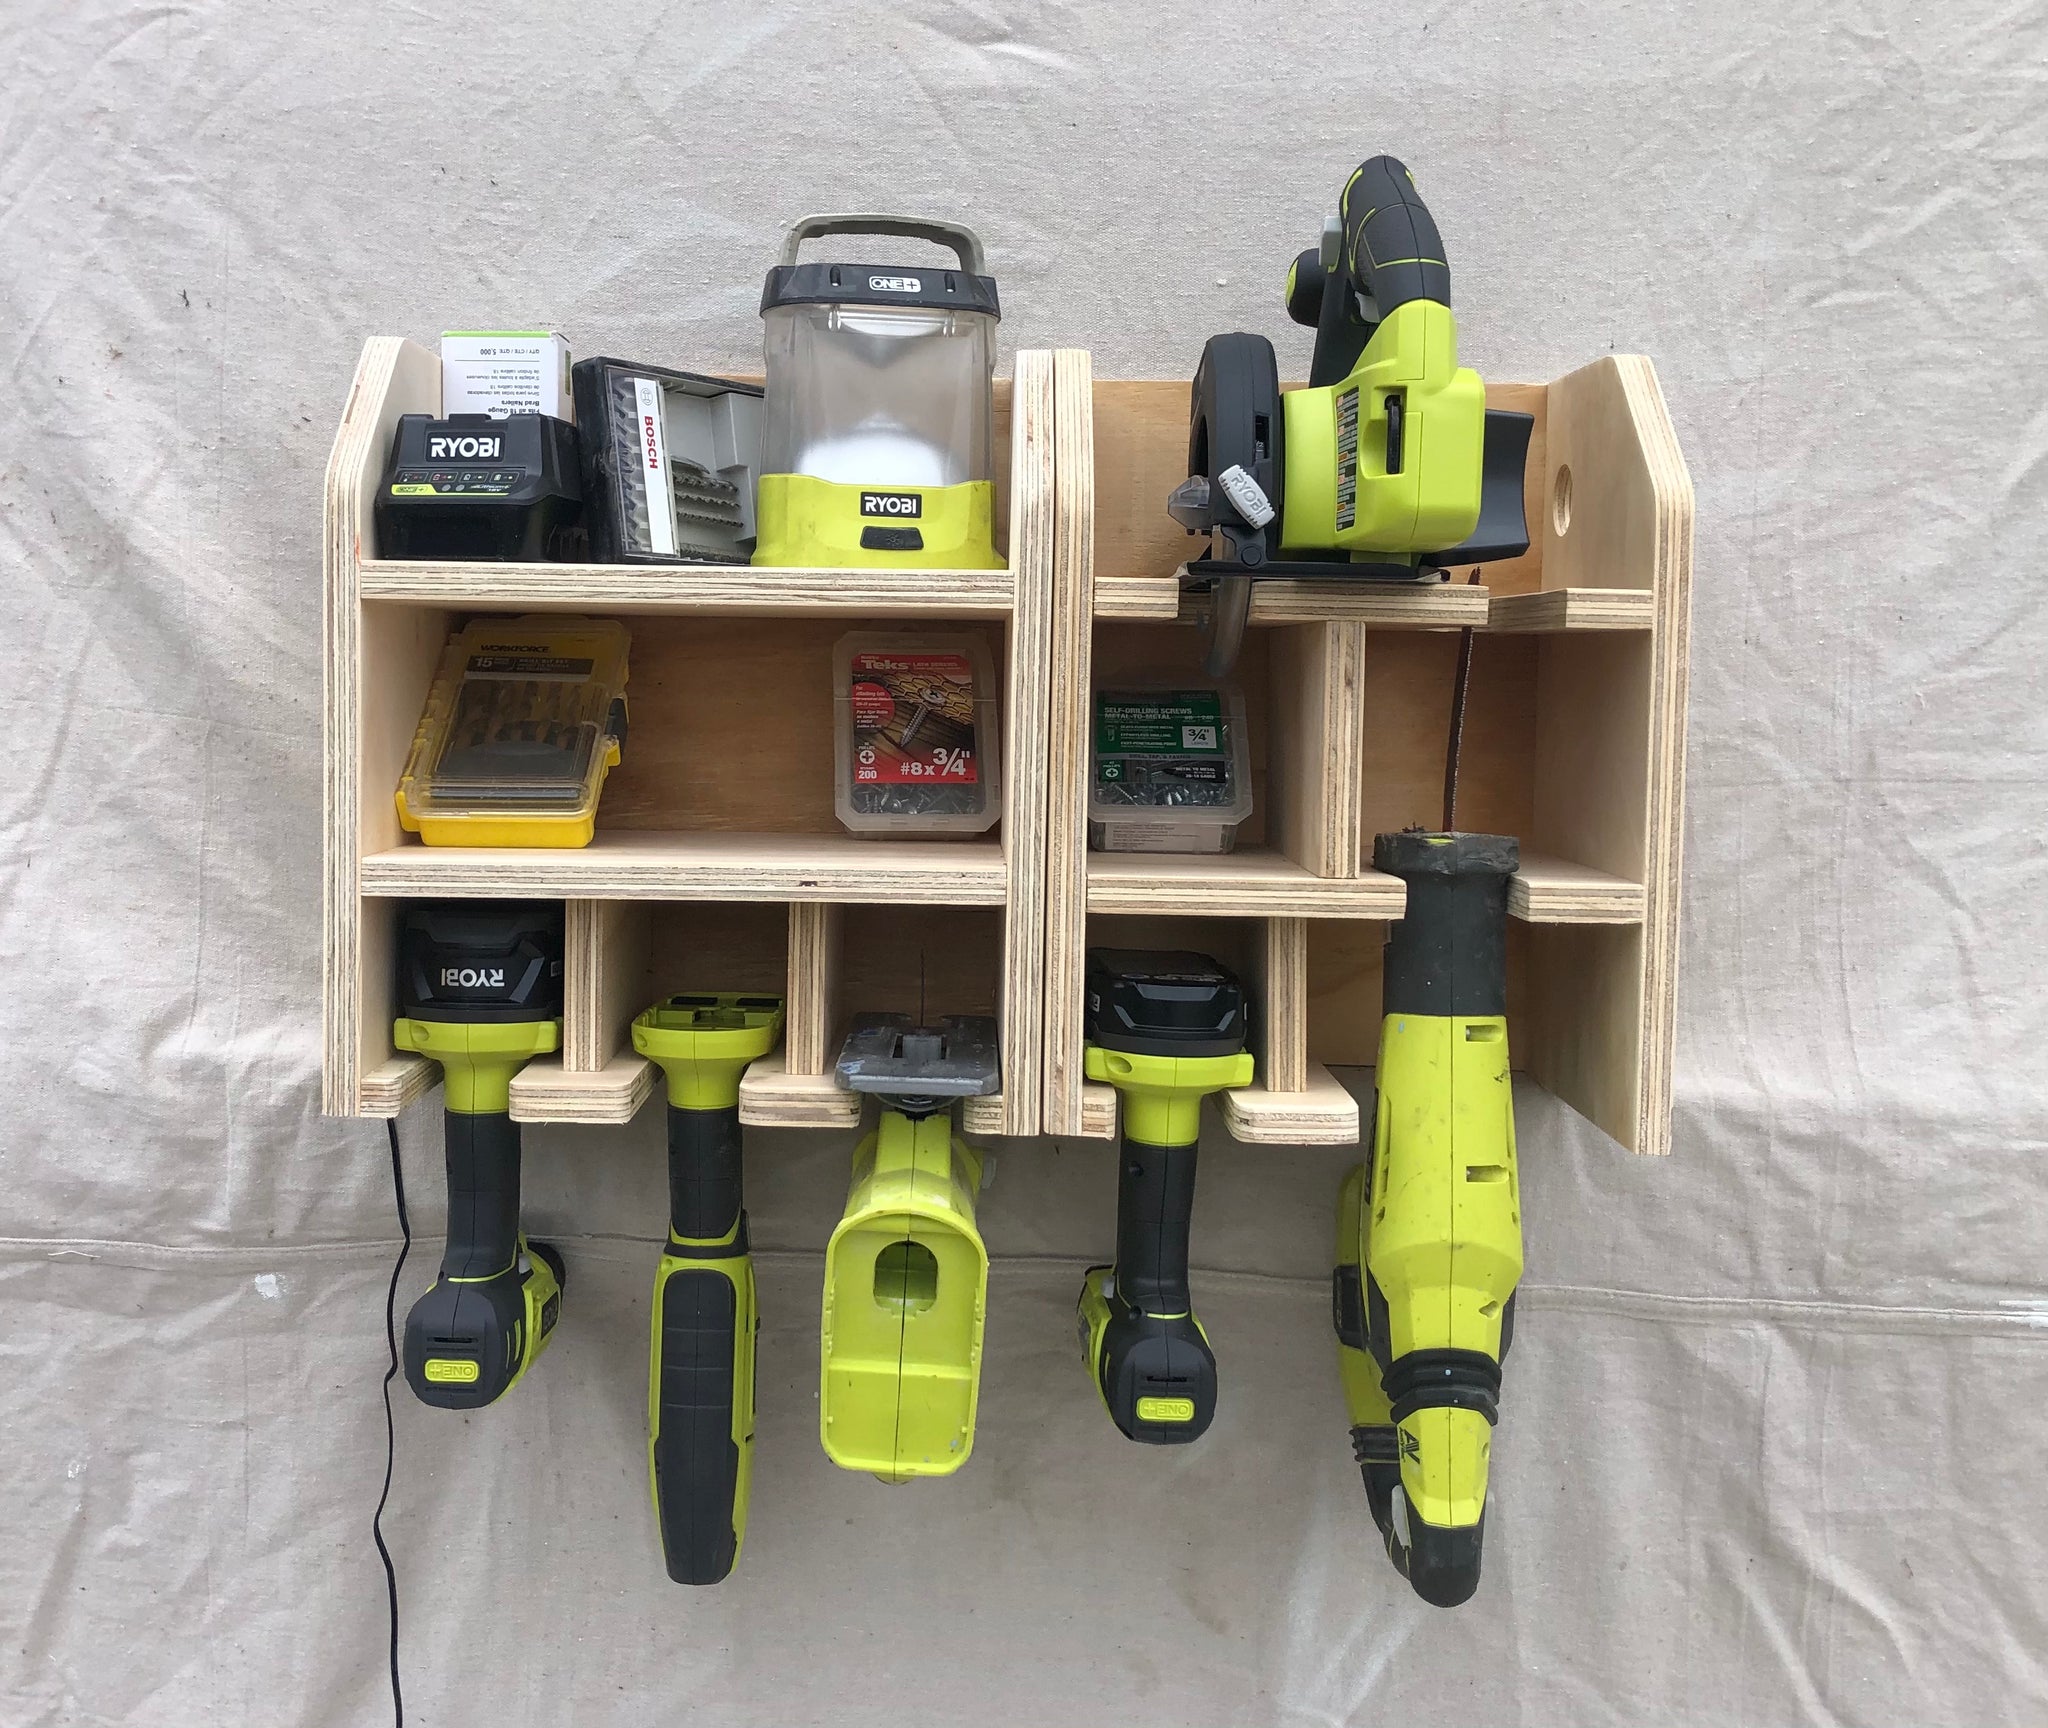 Plastic Self-tapping Organizer Boxes Tools